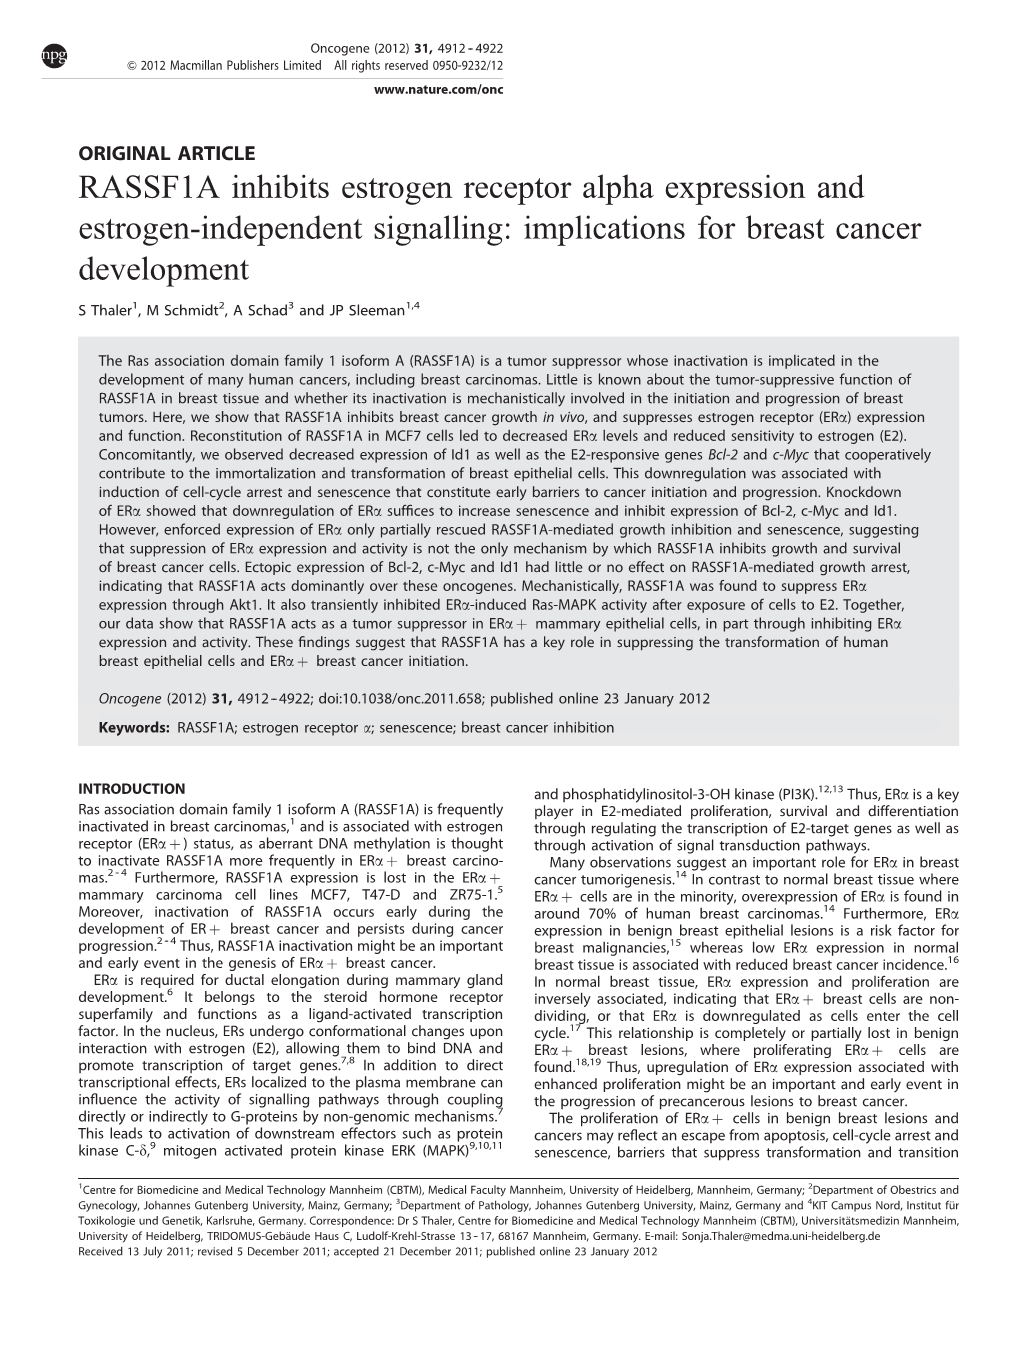 Implications for Breast Cancer Development